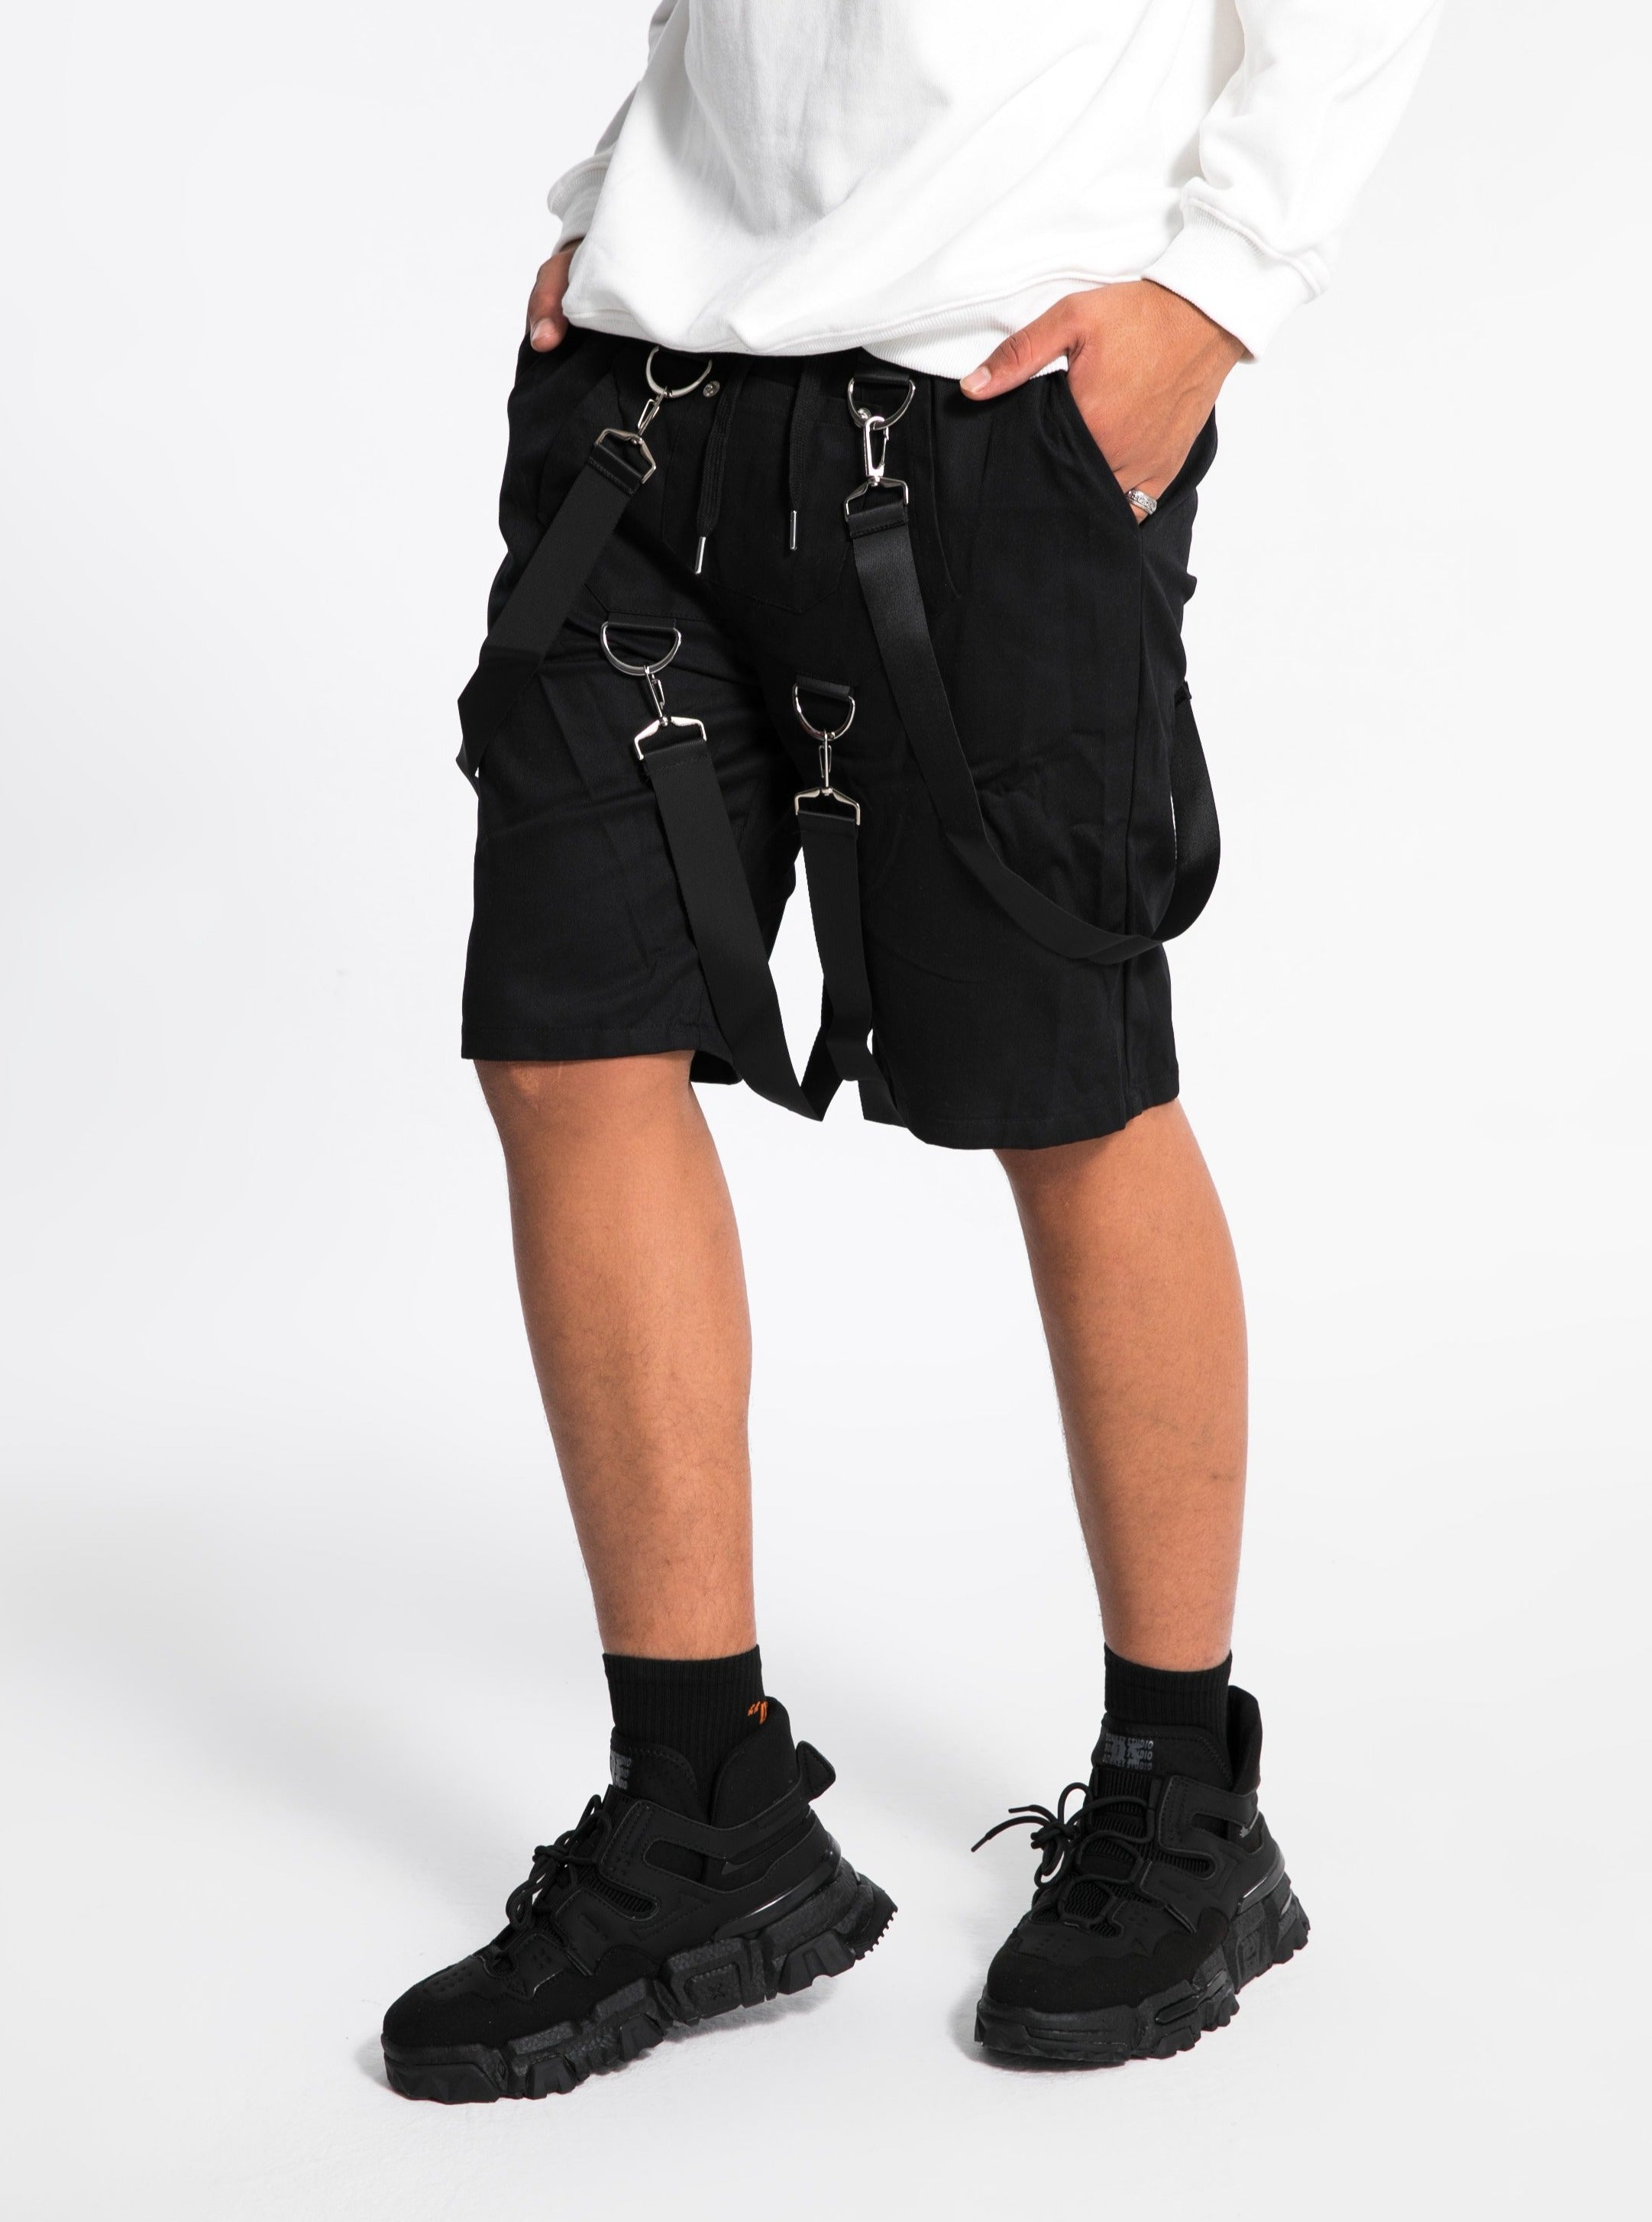 JUSTNOTAG Button-knit wide loose five-point pants pocket cargo shorts